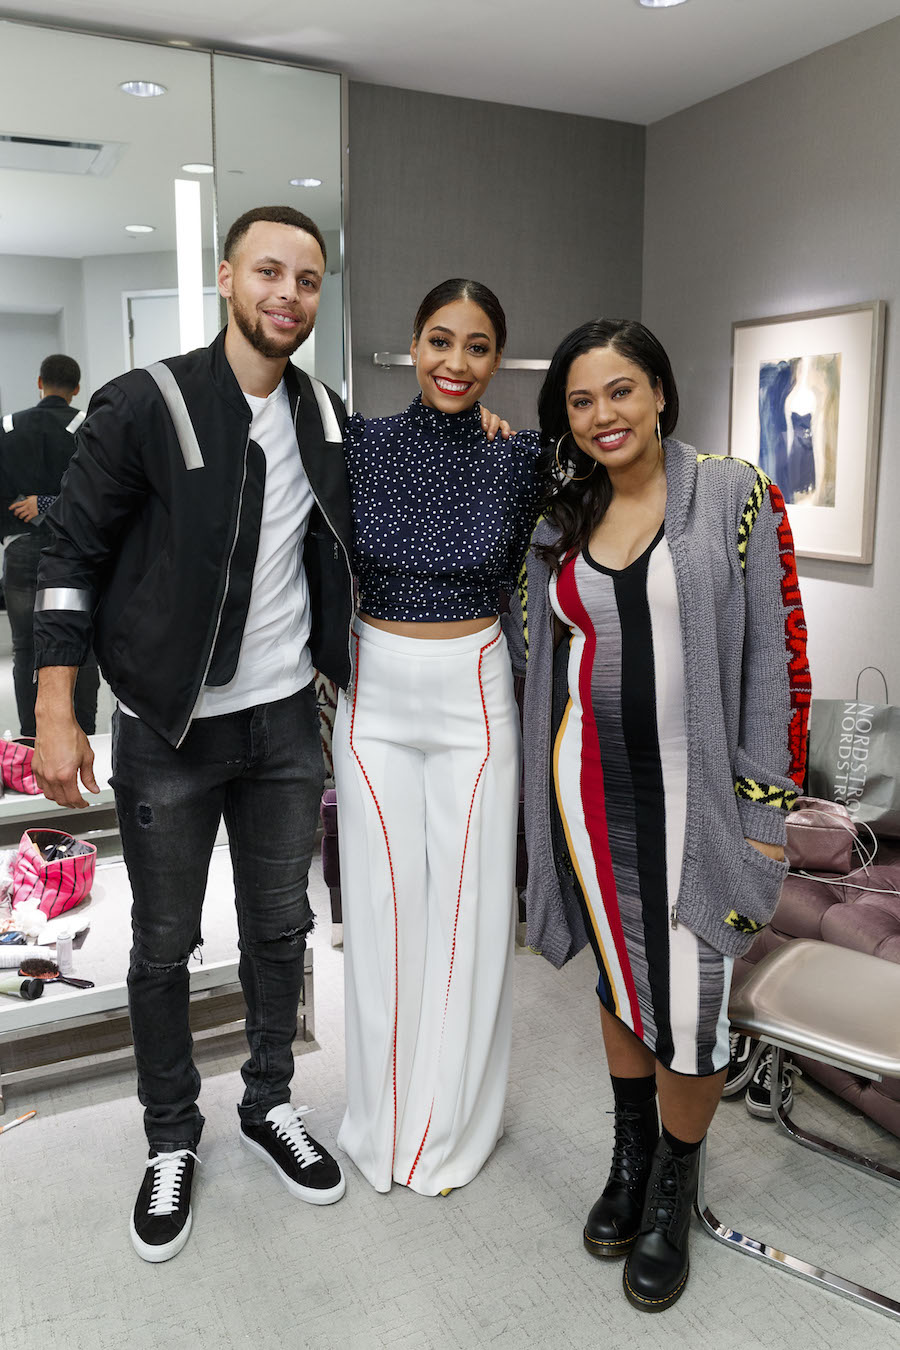 Stephen Curry, Sydel Curry and Ayesha Curry at an event in March